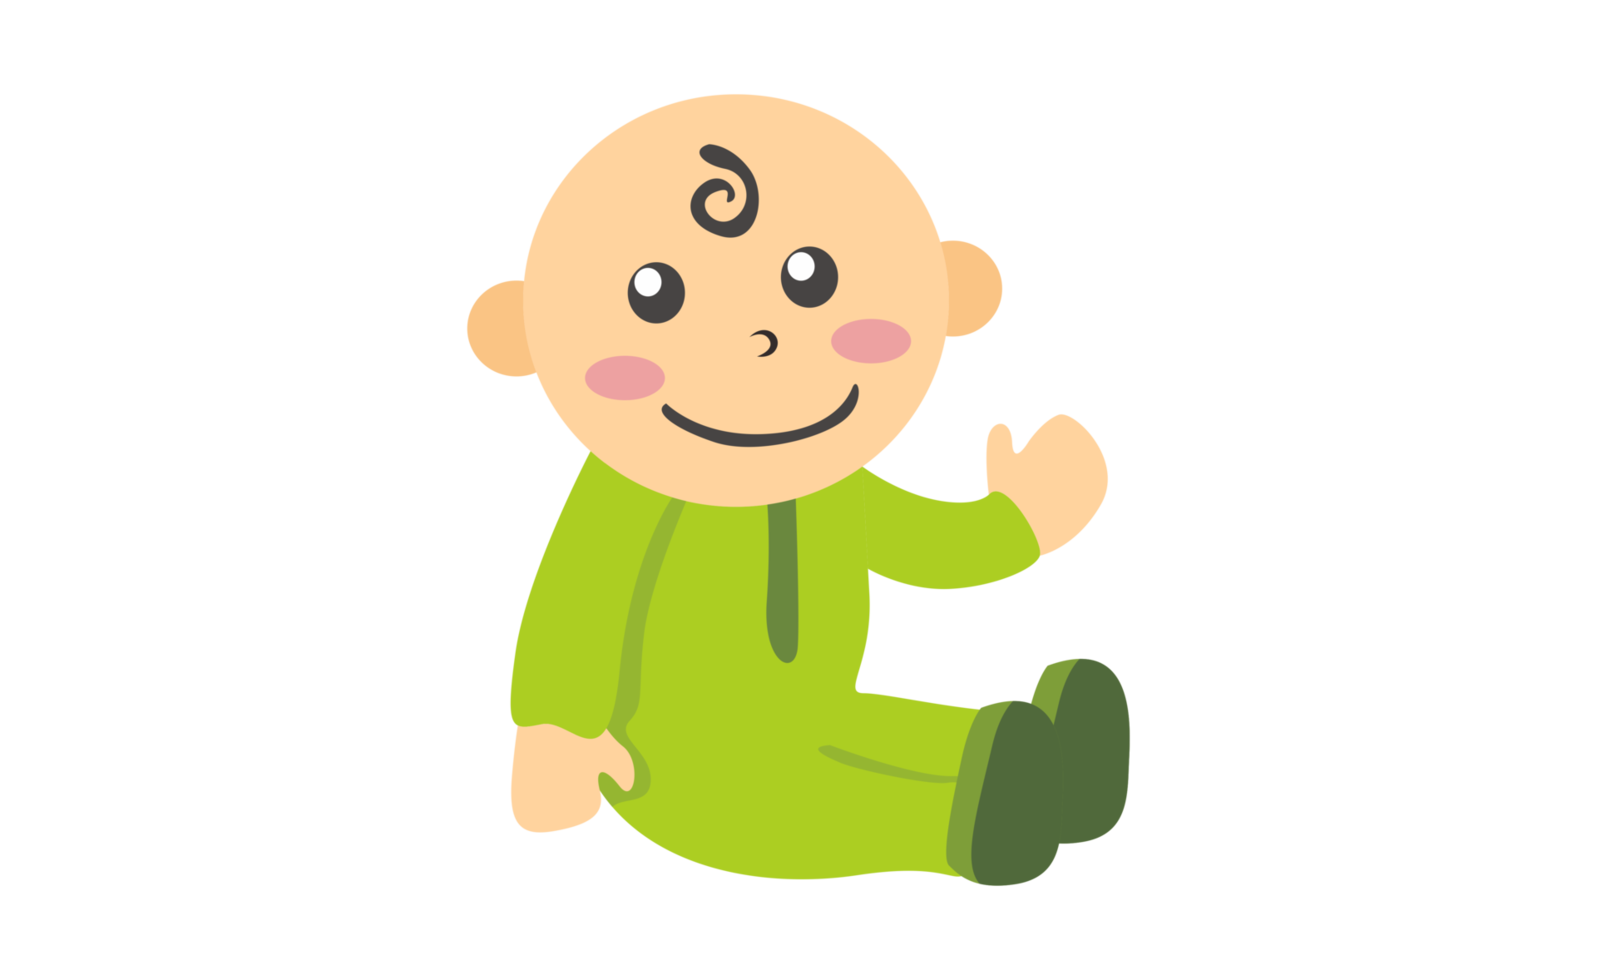 Baby equipment - Adorable Smiling Baby Boy Greeting Waving Hand png